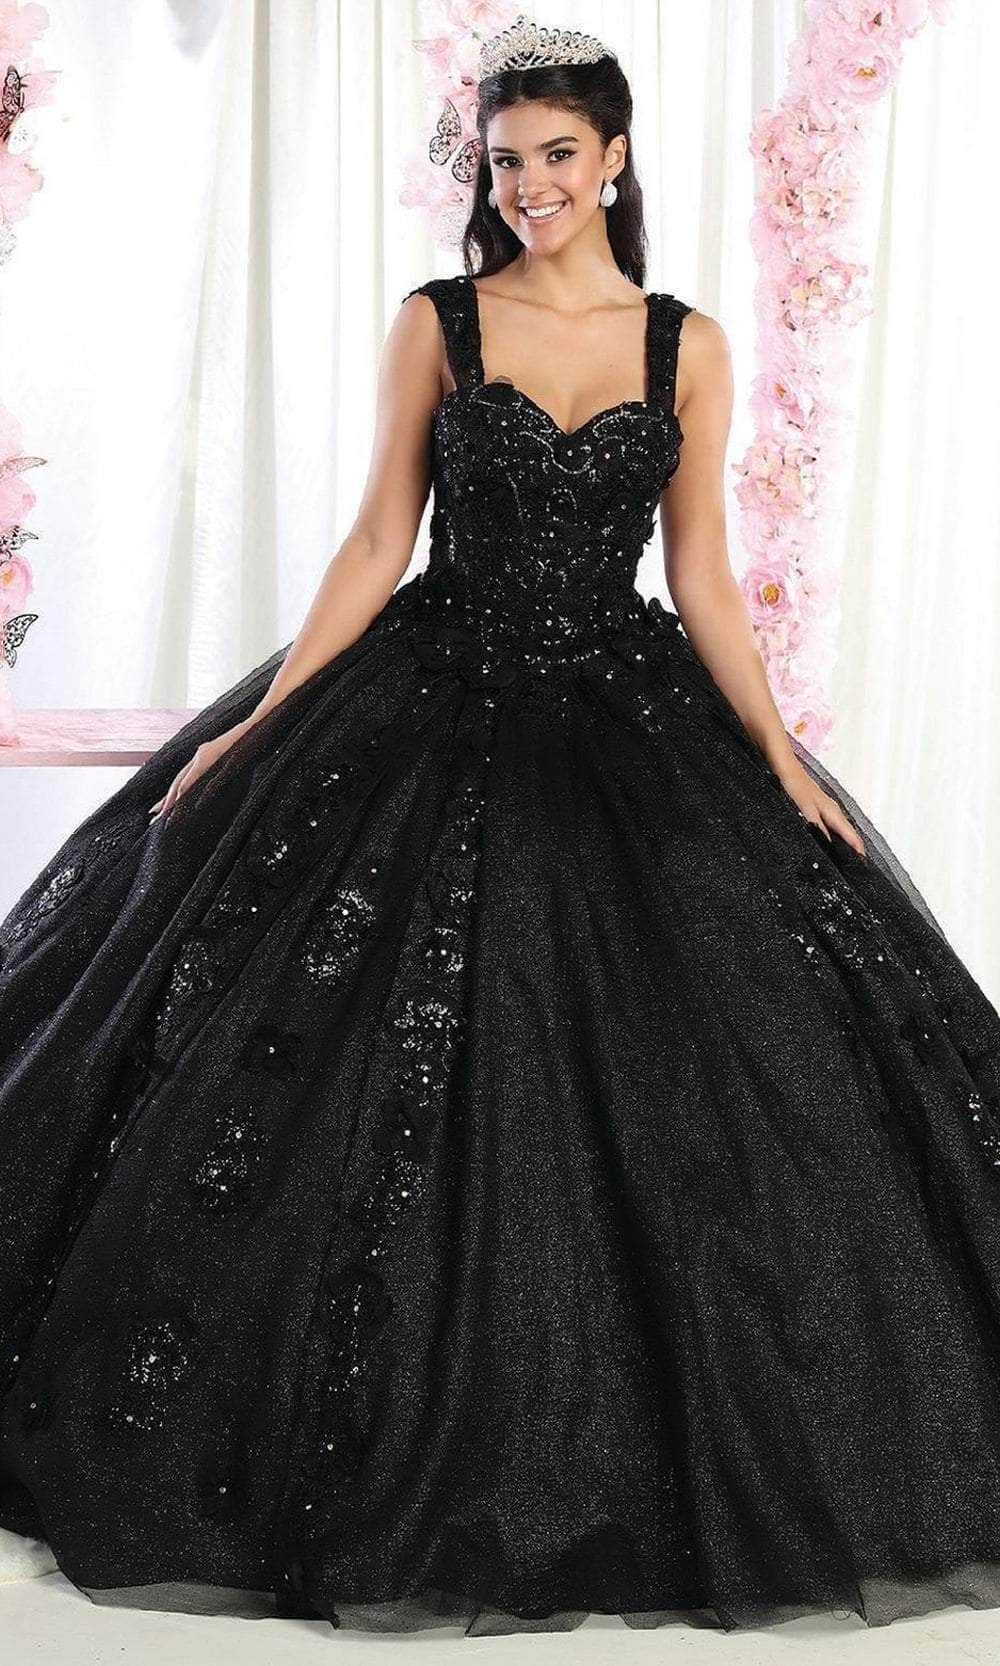 May Queen, May Queen LK171 - Wide Strap Floral Glitter Ballgown